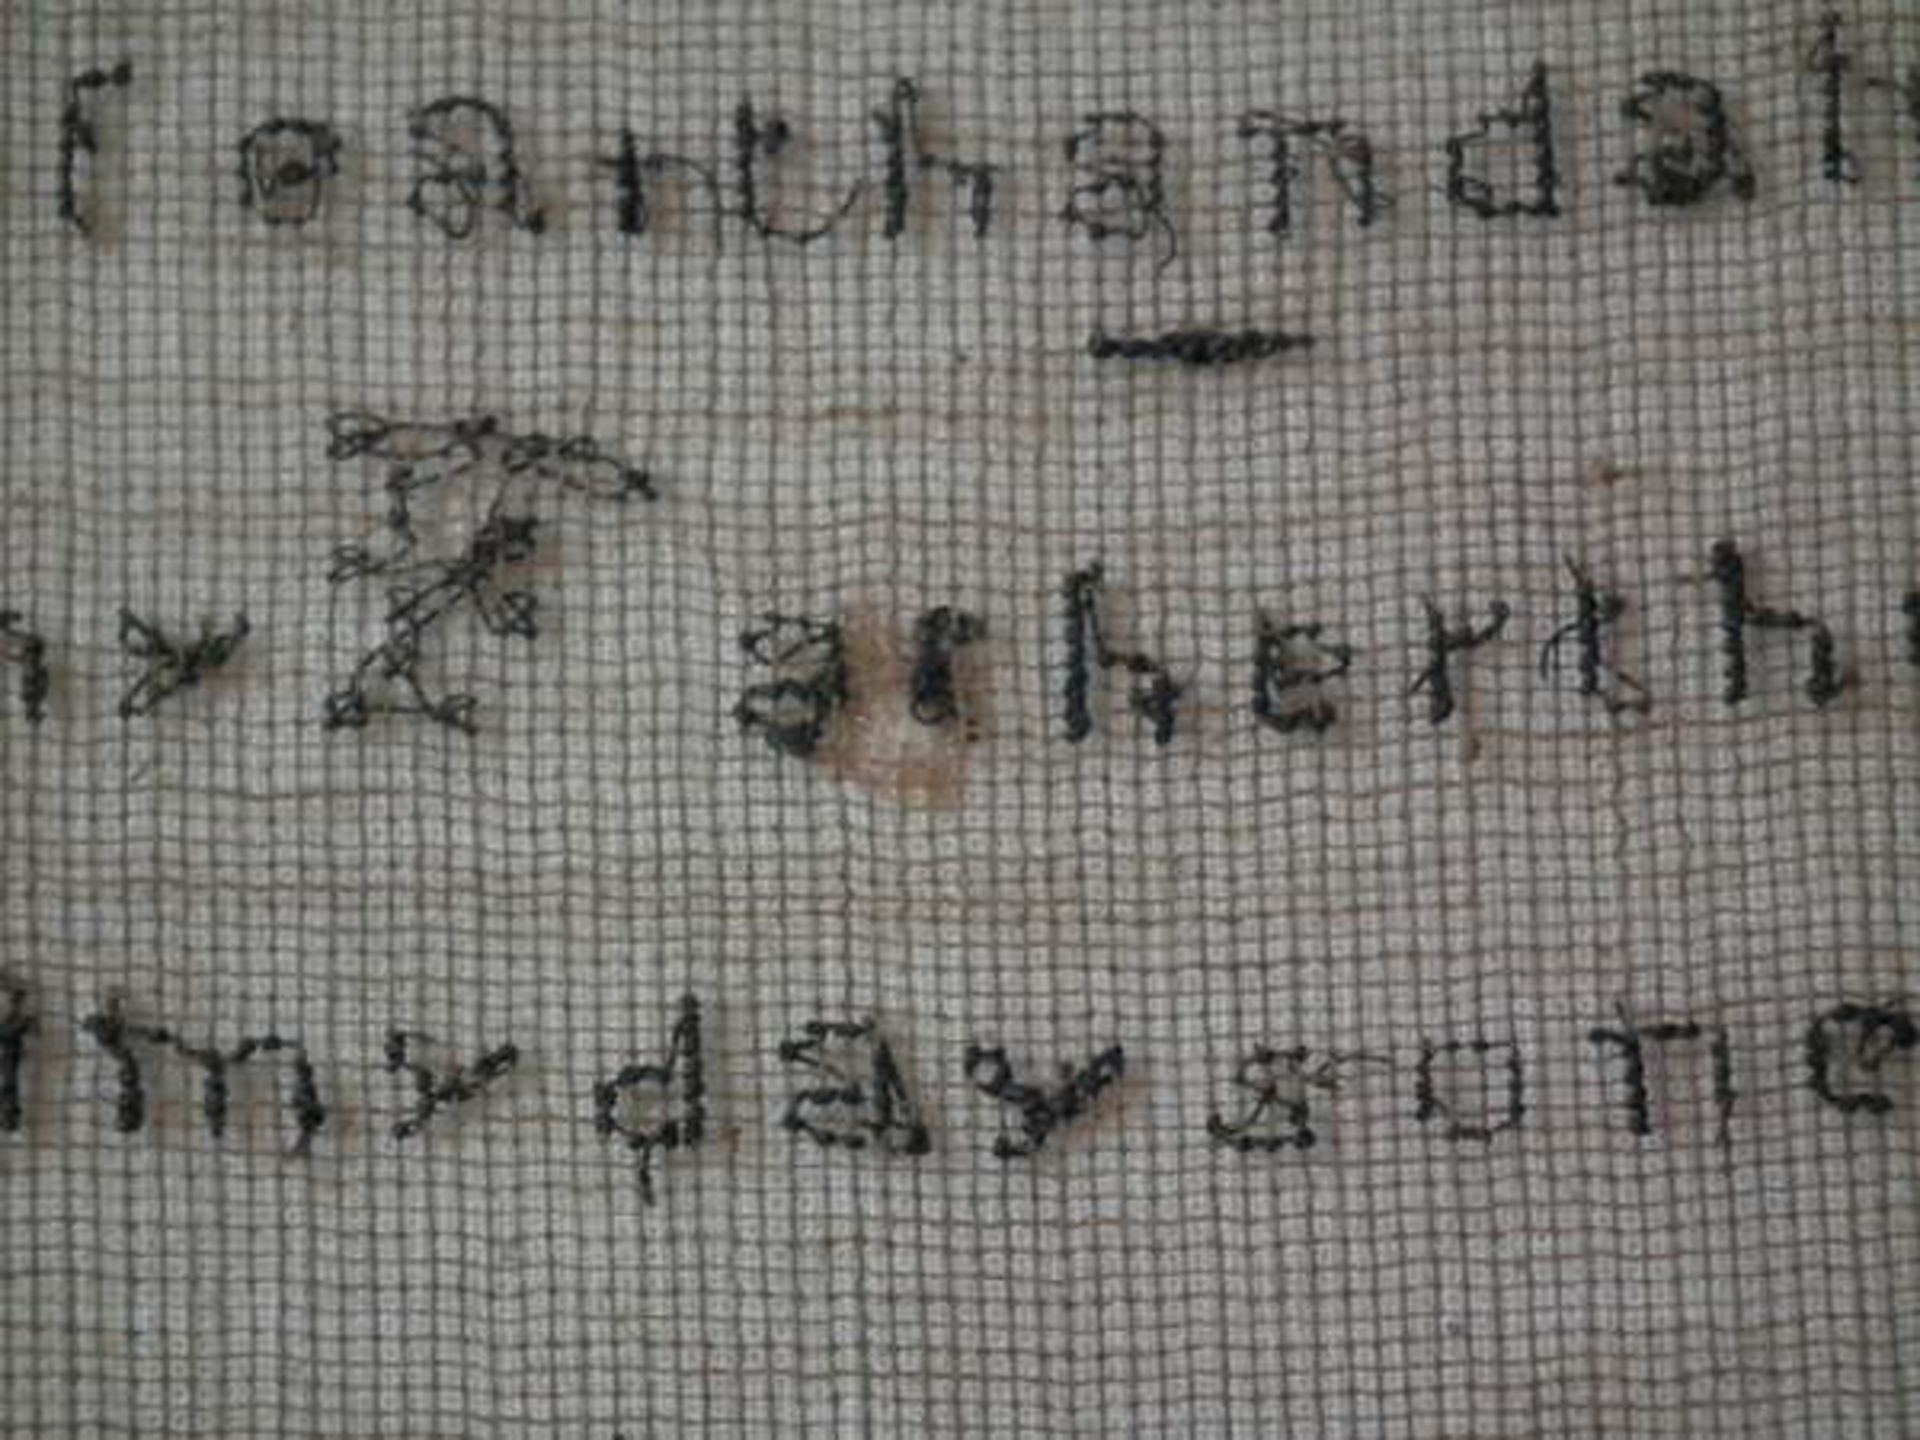 Needlework School Sampler dated 1843 by Sarah Bryan FREE UK DELIVERY - Image 19 of 38